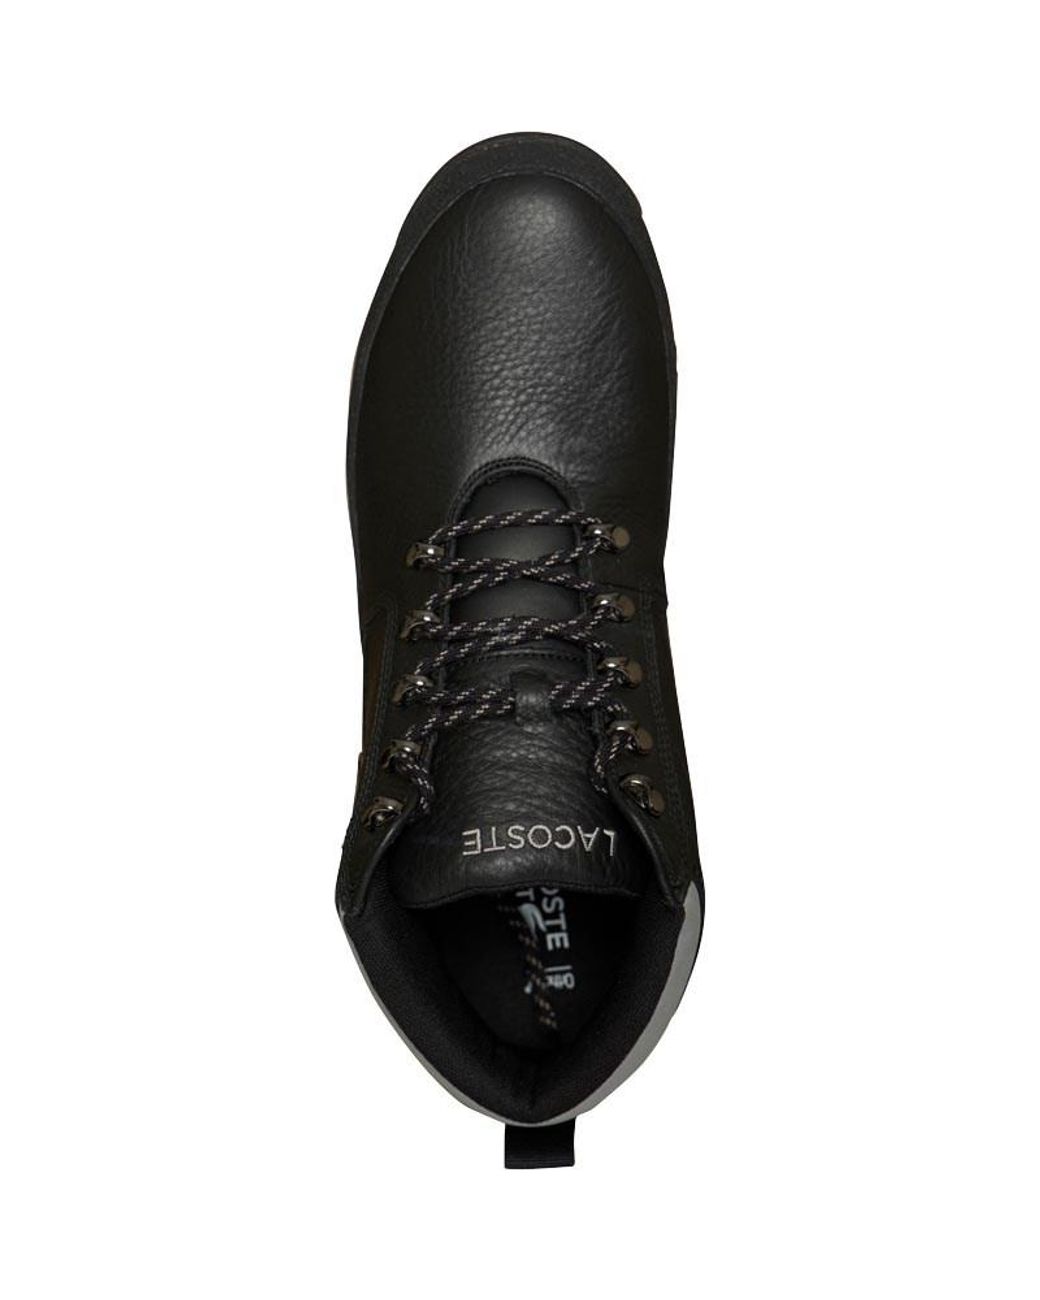 lacoste upton boots price